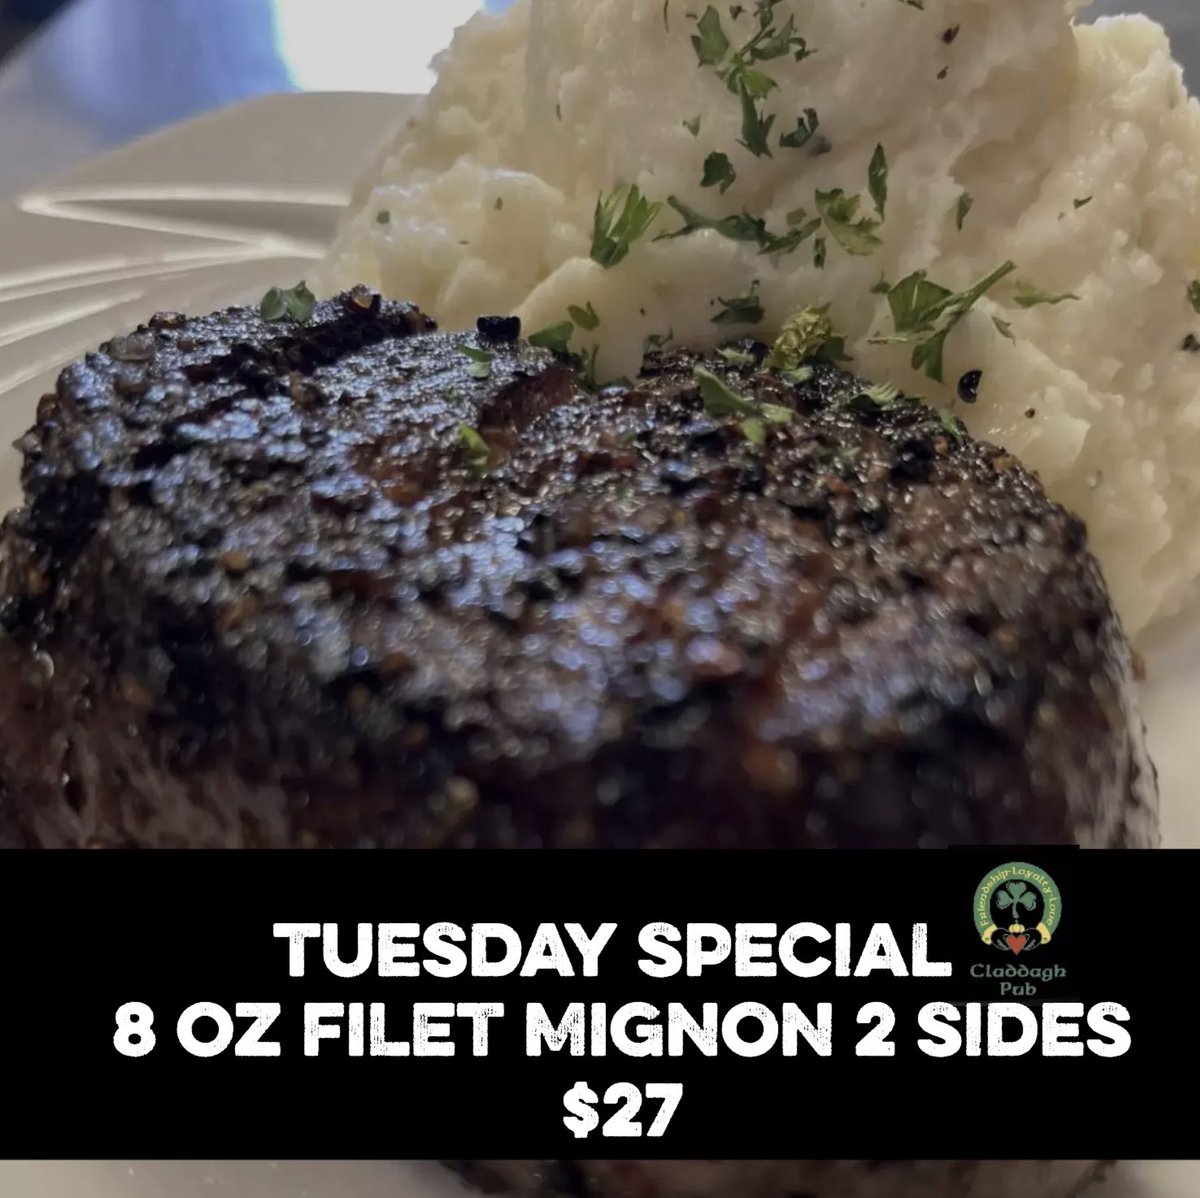 Craving a mouthwatering Filet 🥩 Mignon? 
Ditch cooking tonight and head straight to Claddagh Pub! 
Trust us, your taste buds will thank you! 
#FiletMignonLovers #TuesdayTreats #CladdaghPub #baltimoresbest